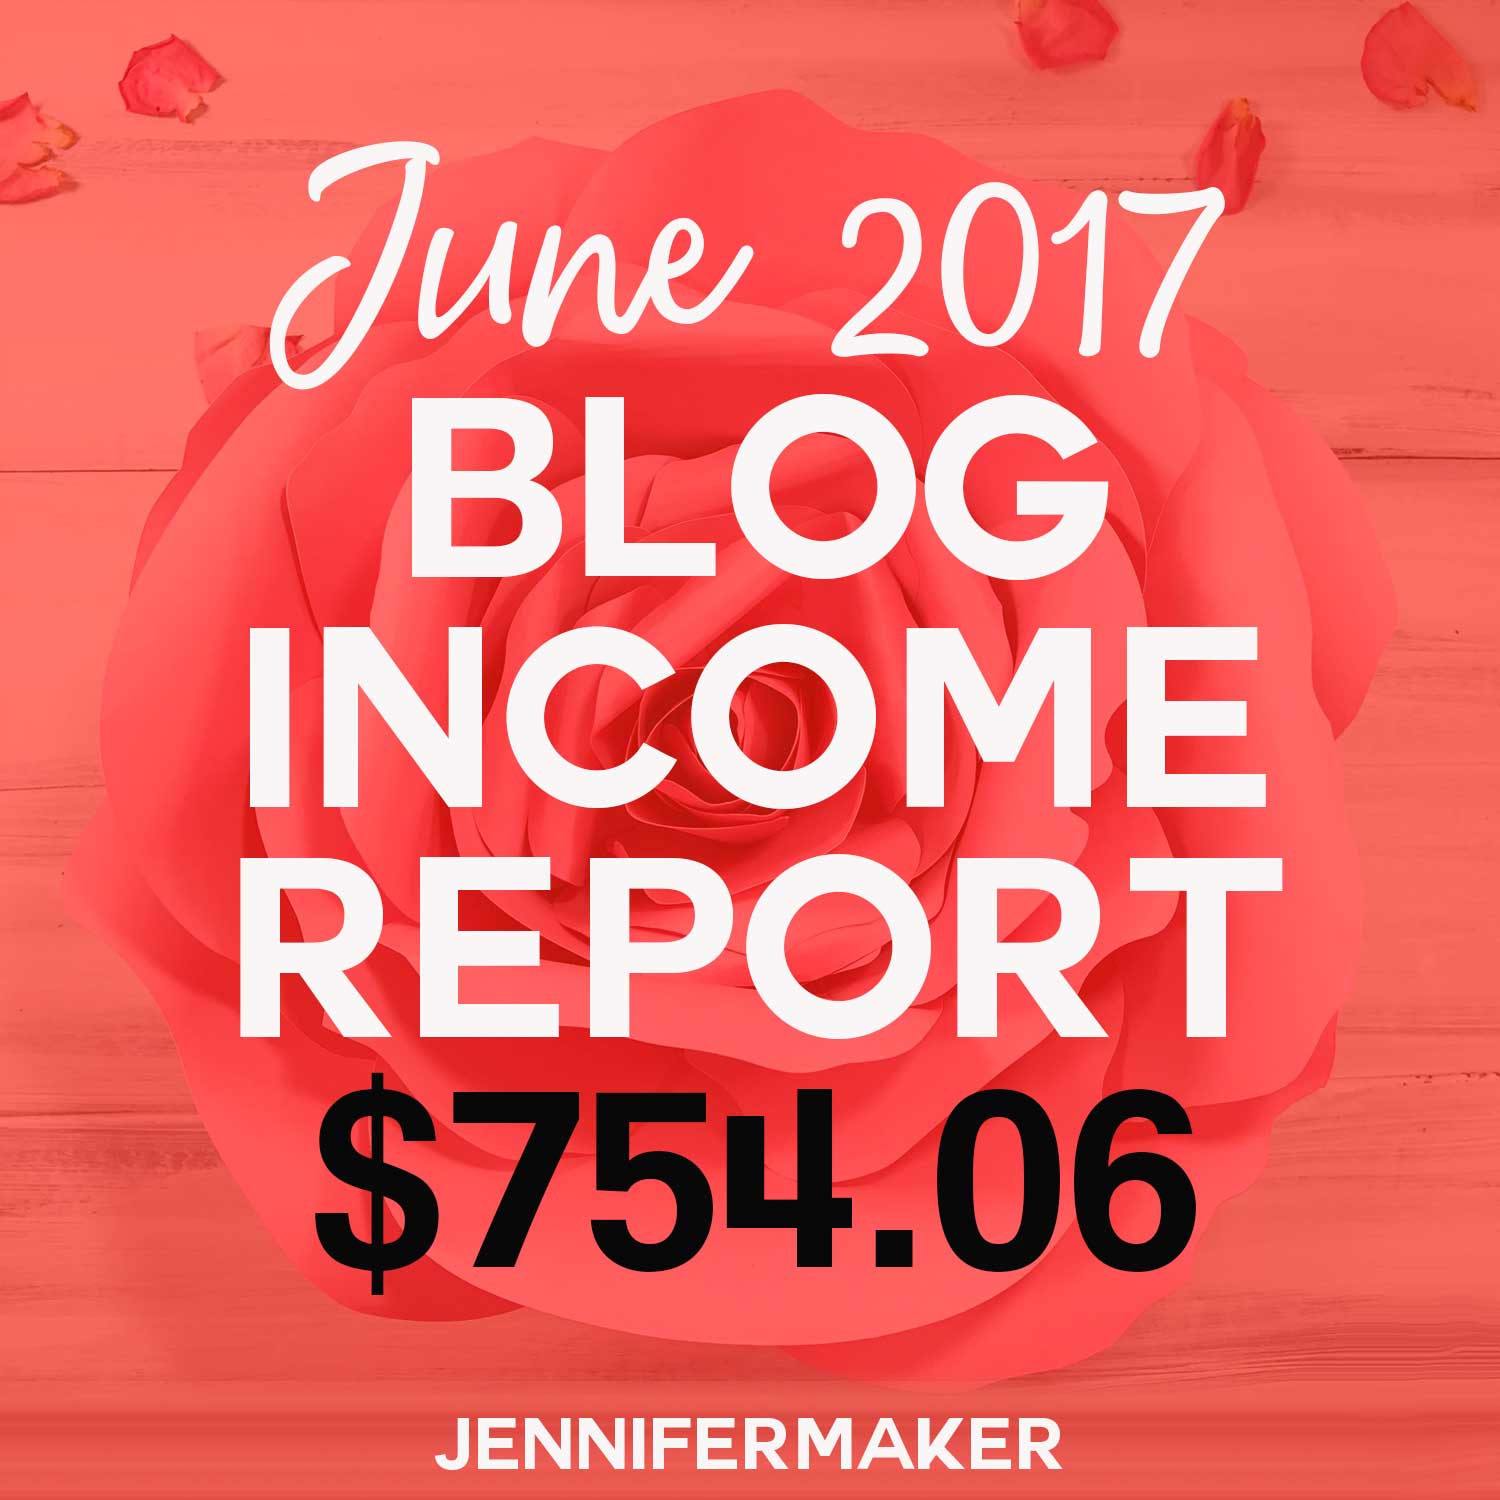 How Do Blogs Make Money: Income Reports Tell The Story of Blogging Revenue (June 2017) #incomereports #blogging